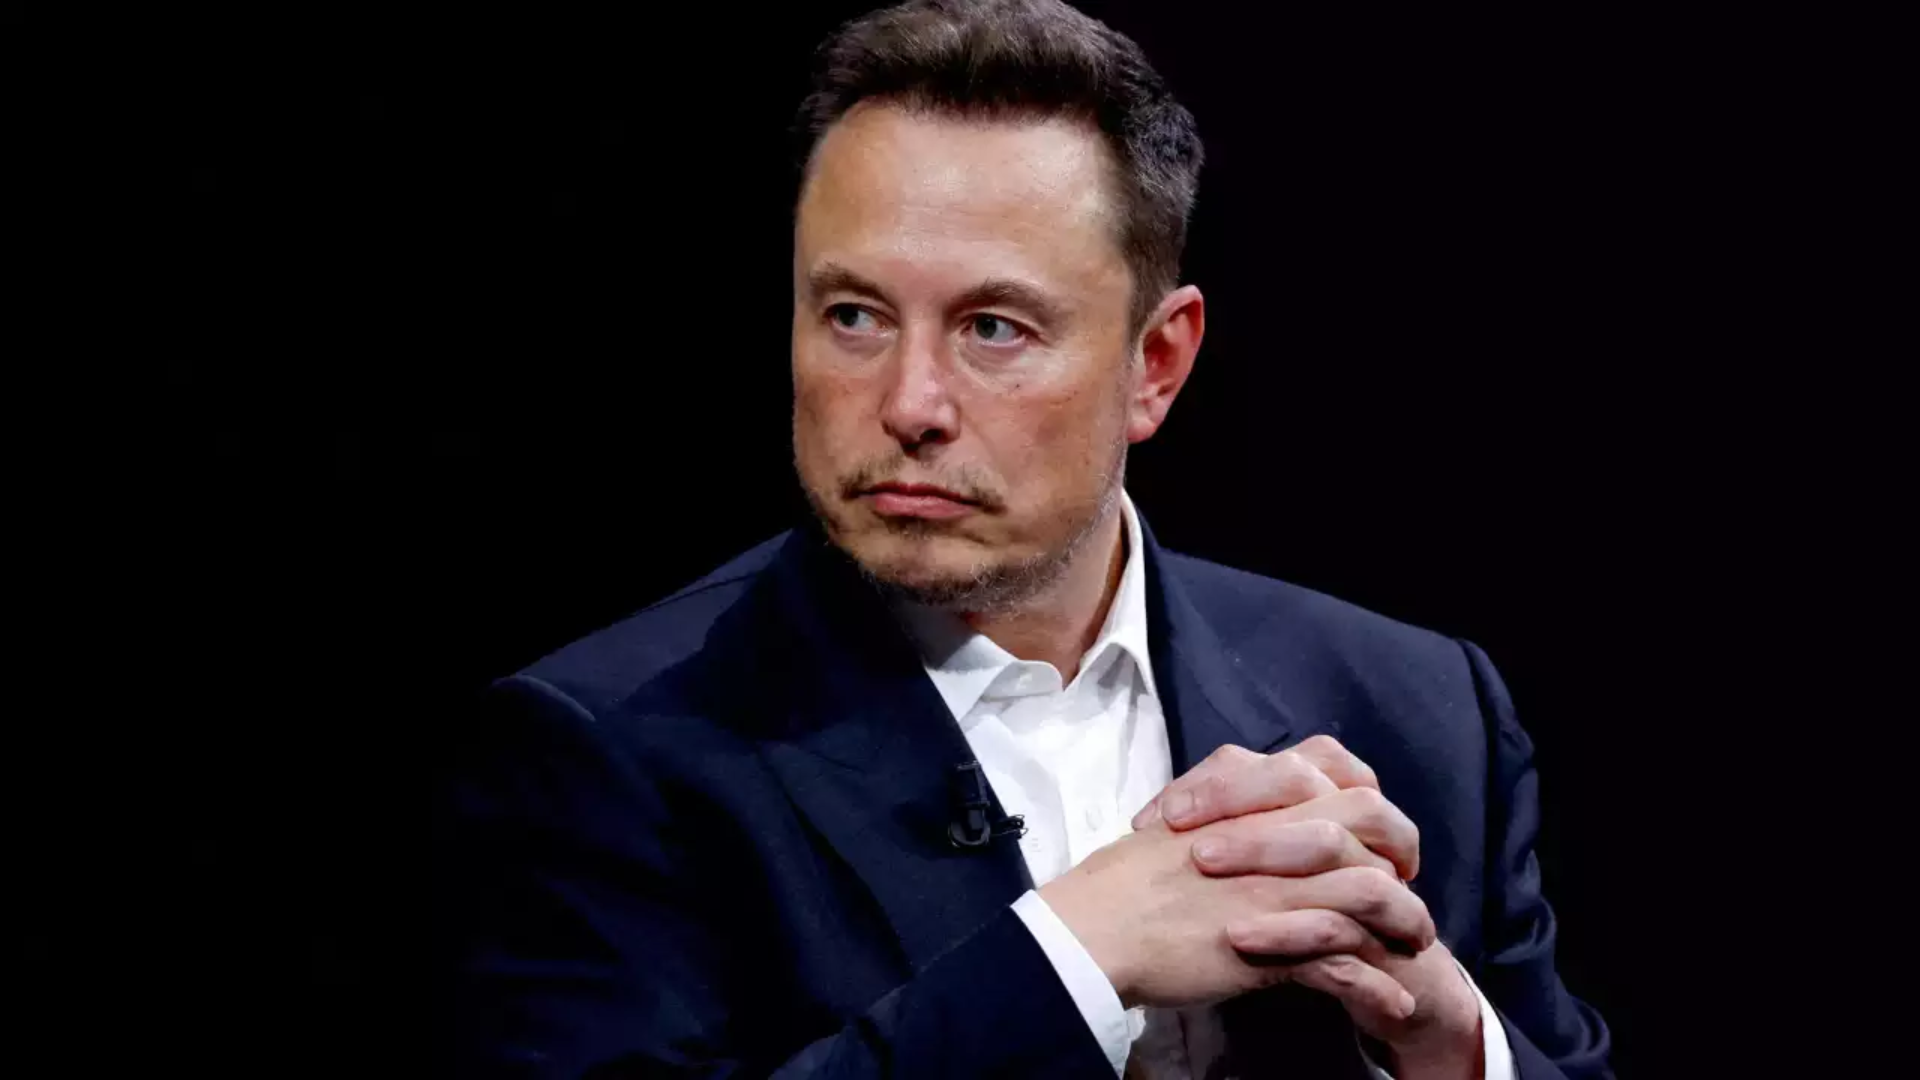 Elon Musk apology Tesla severance packages 'Incorrectly Low' to laid-off employees